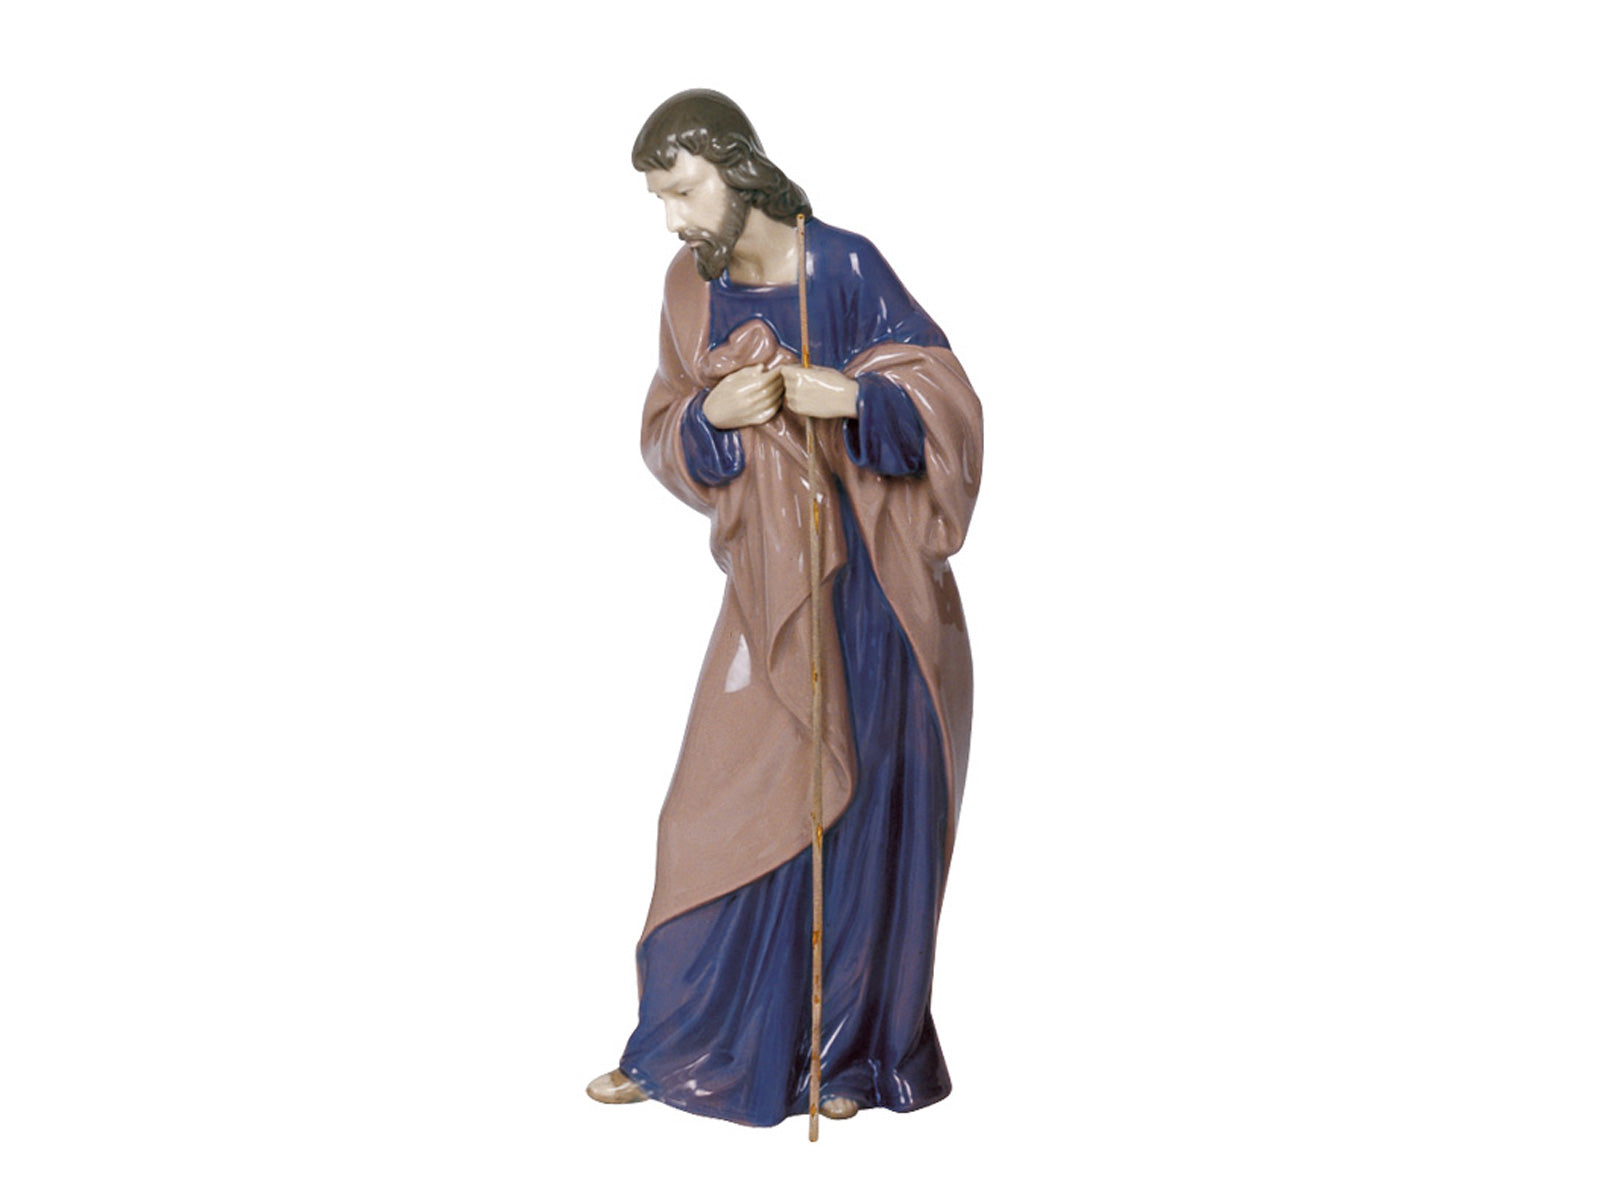 A beautiful porcelain sculpture of Saint Joseph, wearing a brown coat and holding a staff, this Nao figurine would be a beautiful addition to any Nativity set this Christmas.